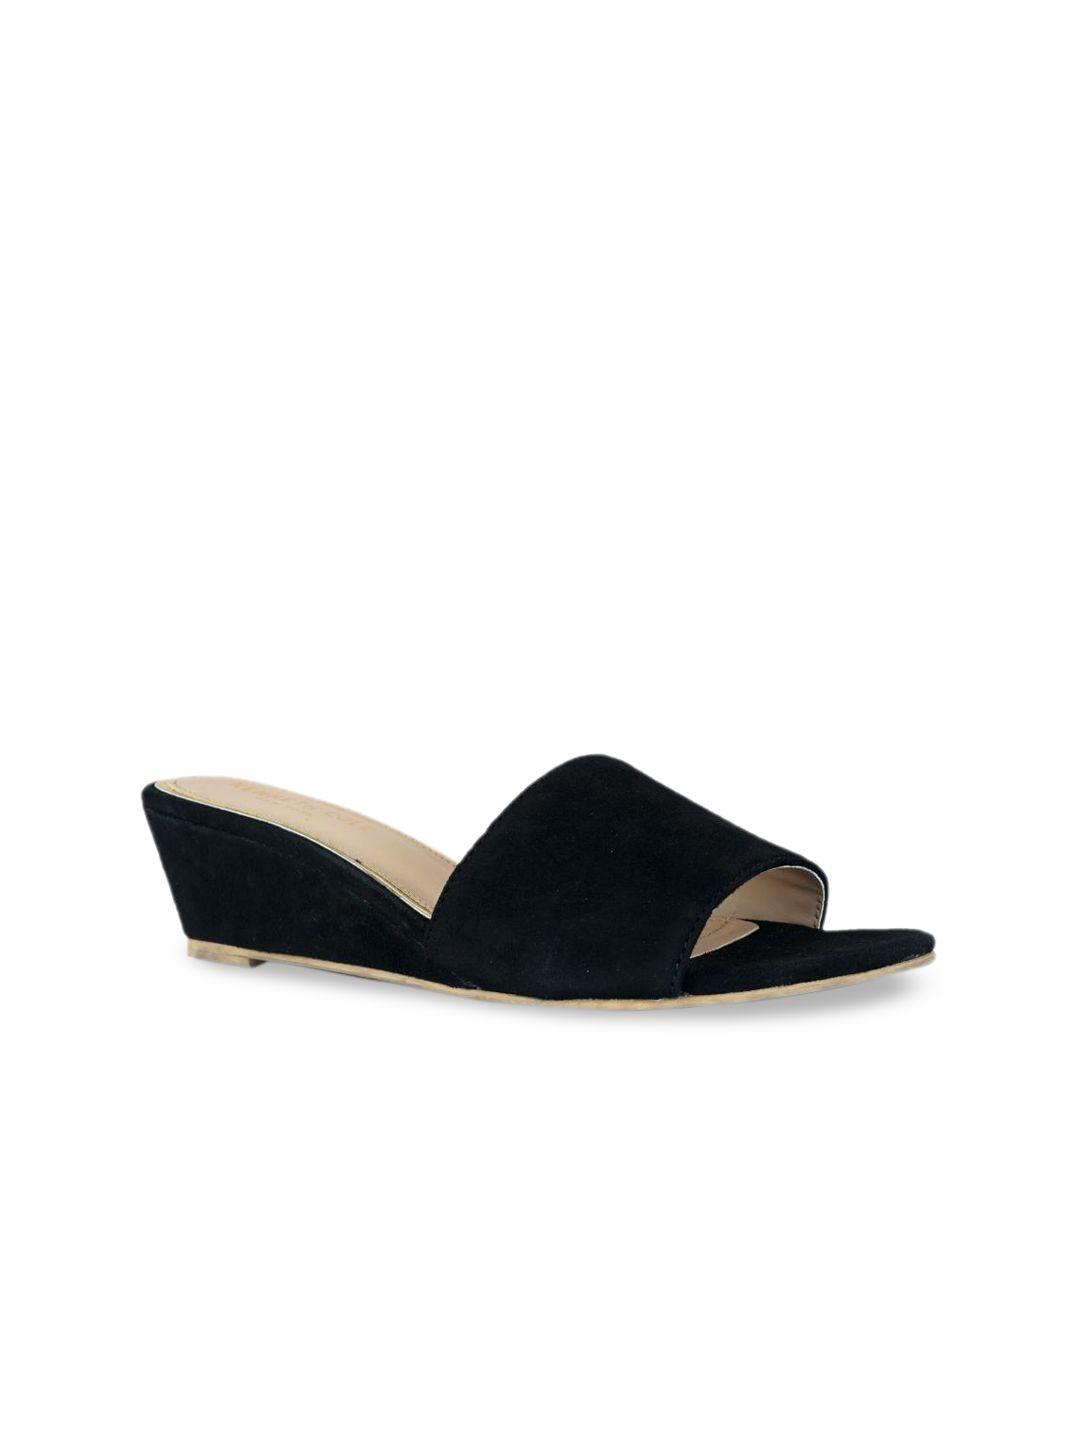 kenneth-cole-women-black-solid-leather-wedges